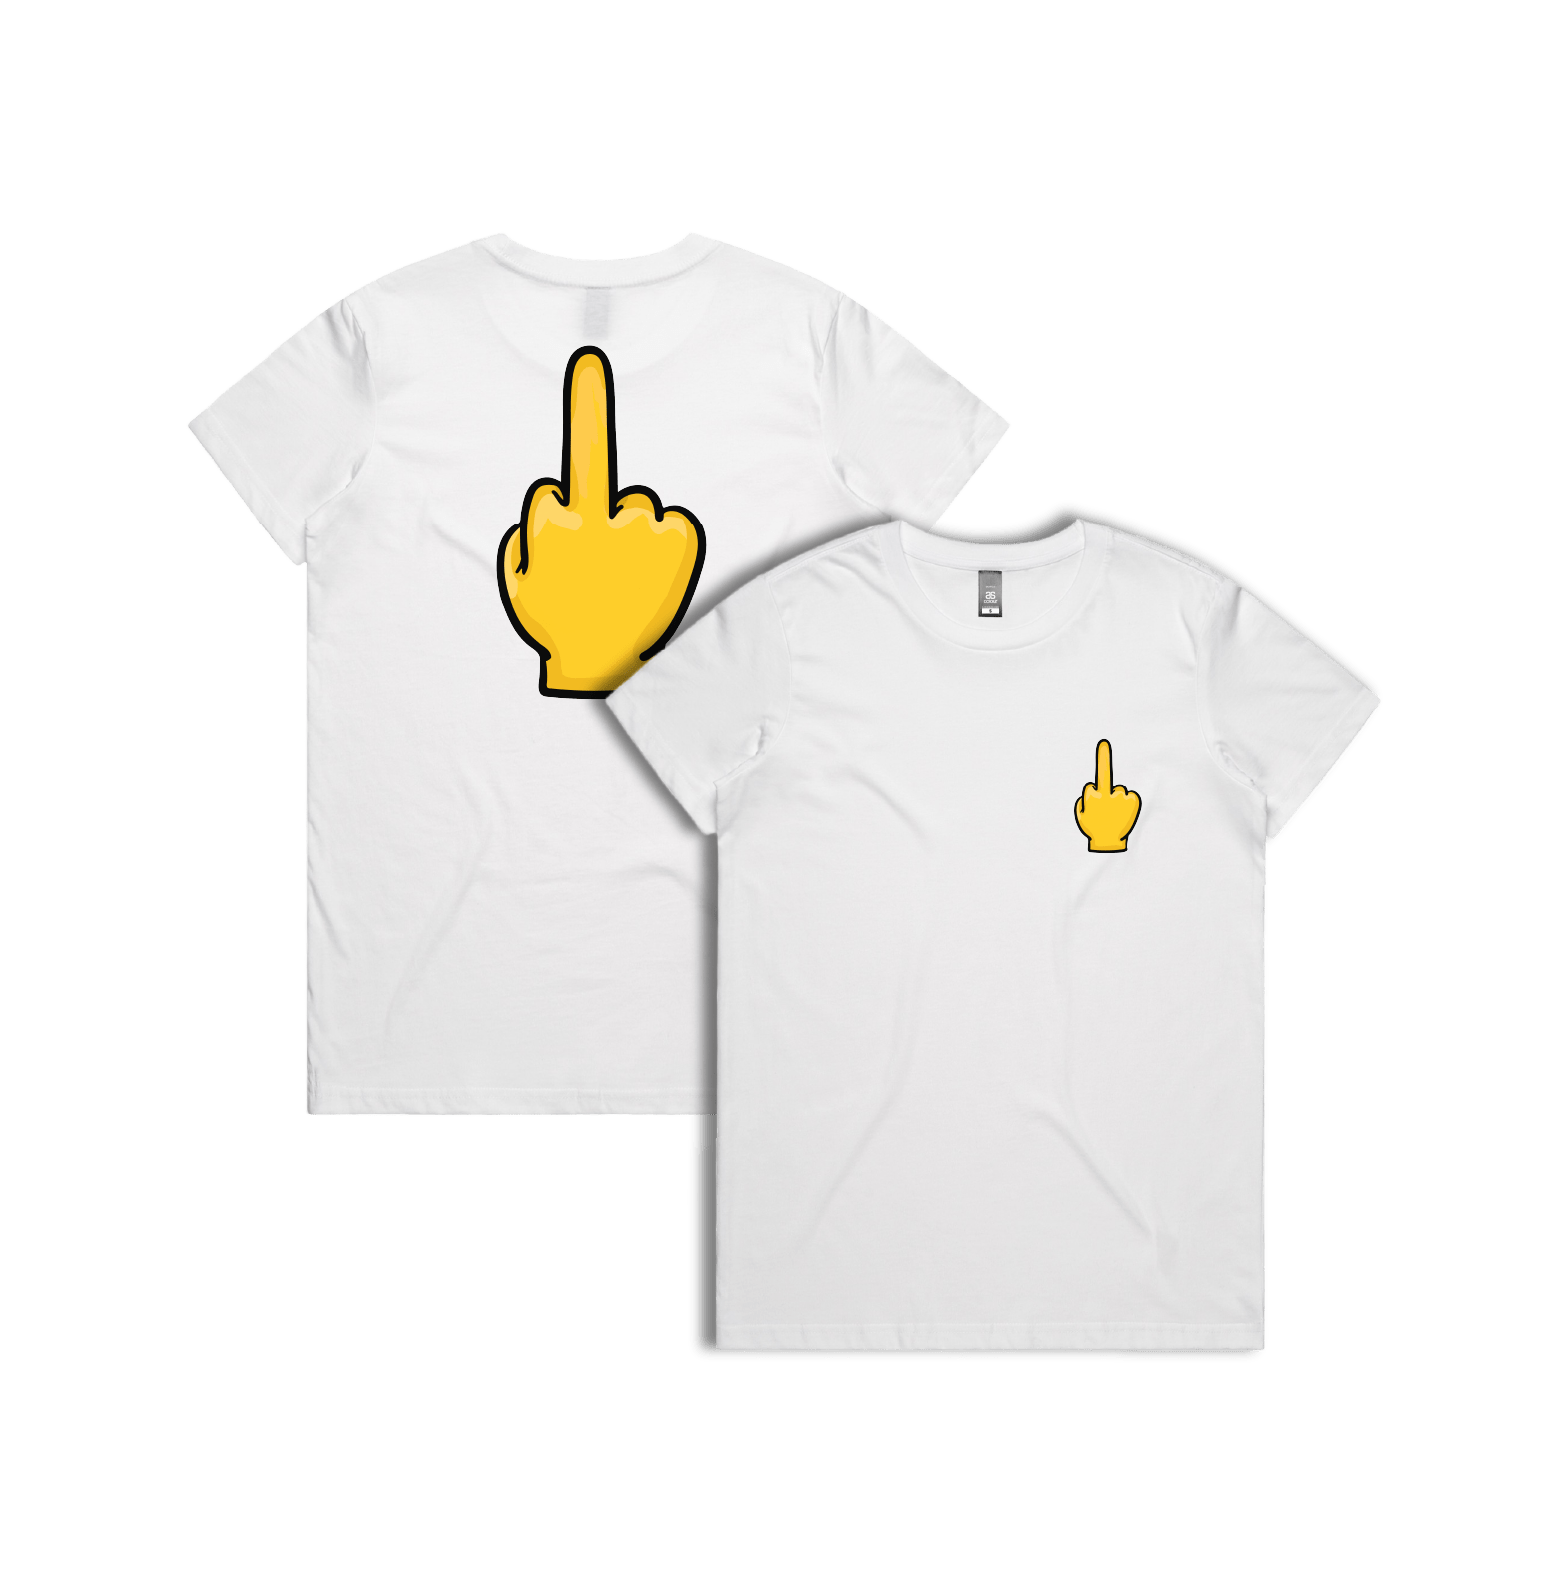 XS / White / Small Front & Large Back Design Up Yours 🖕 - Women's T Shirt